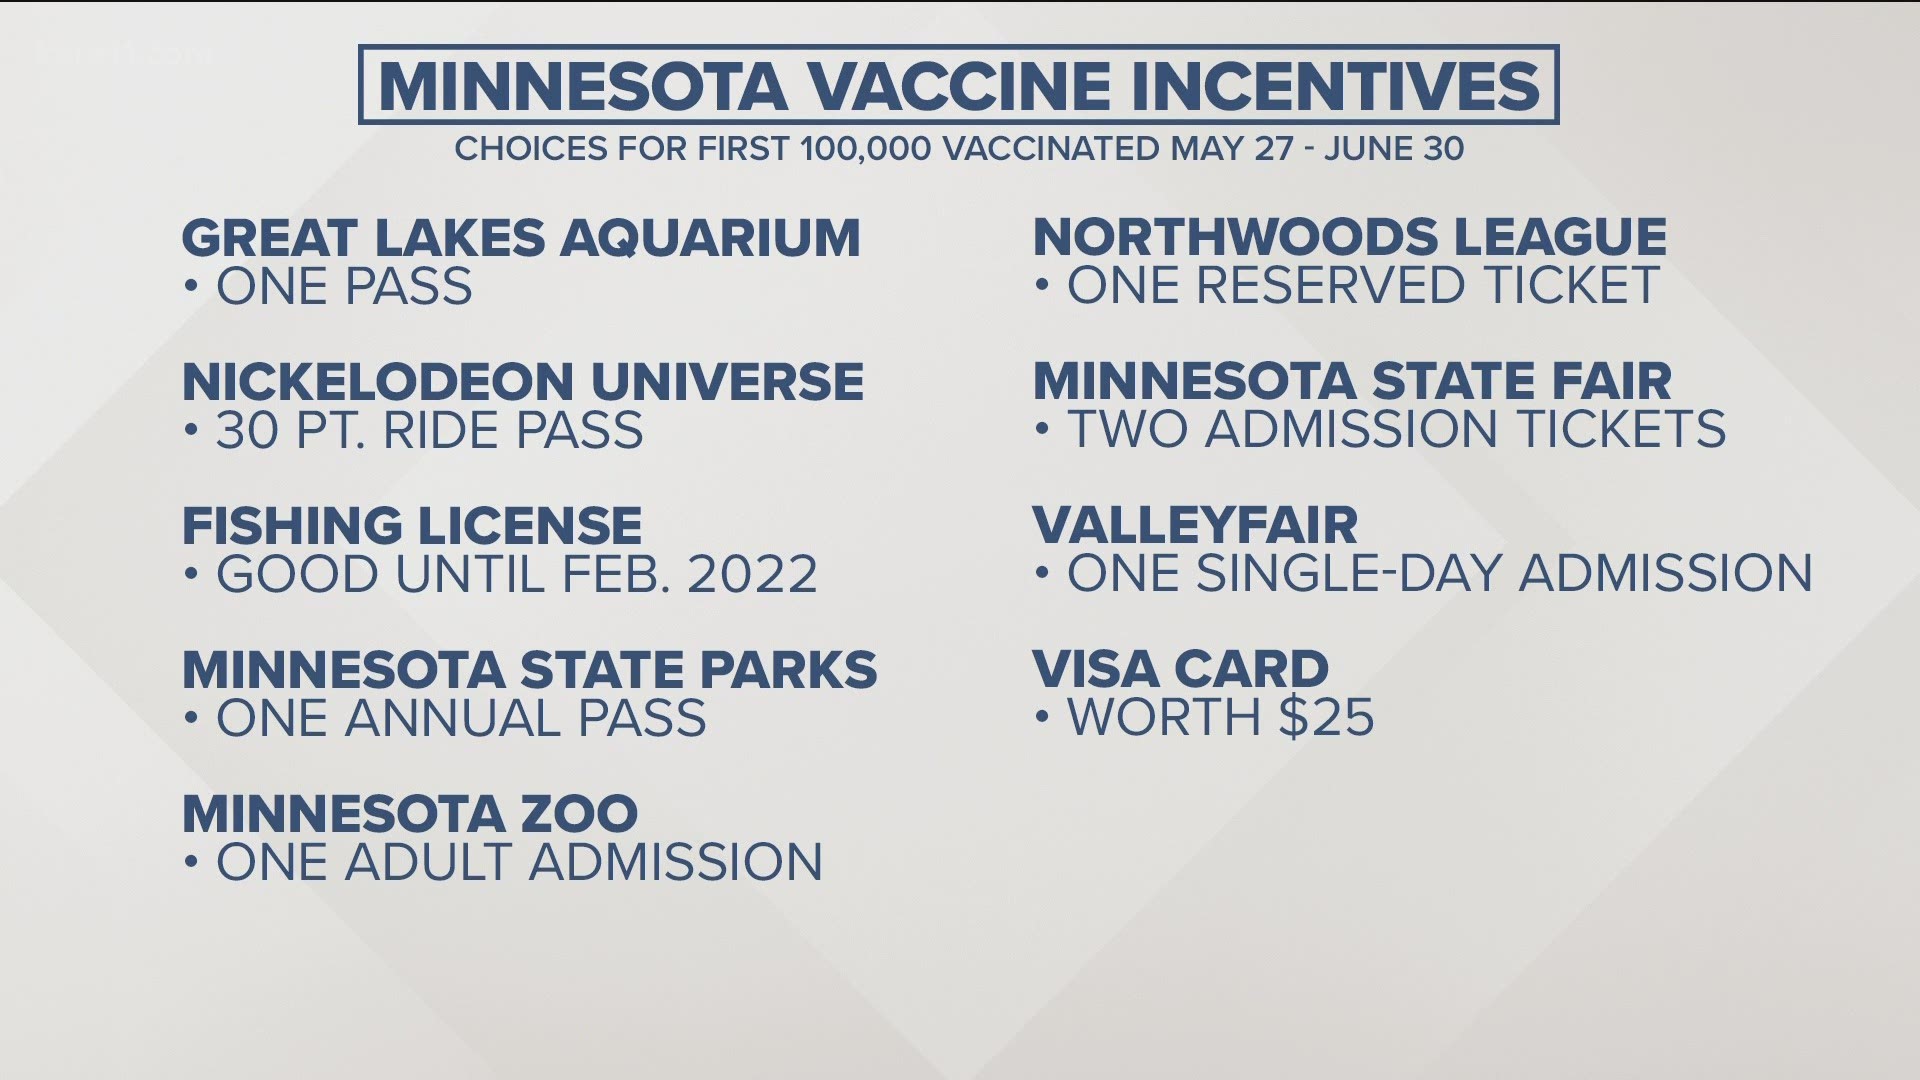 The "Your Shot to Summer" program will reward 100,000 people who get vaccinated between Memorial Day weekend and the end of June with something uniquely Minnesotan.